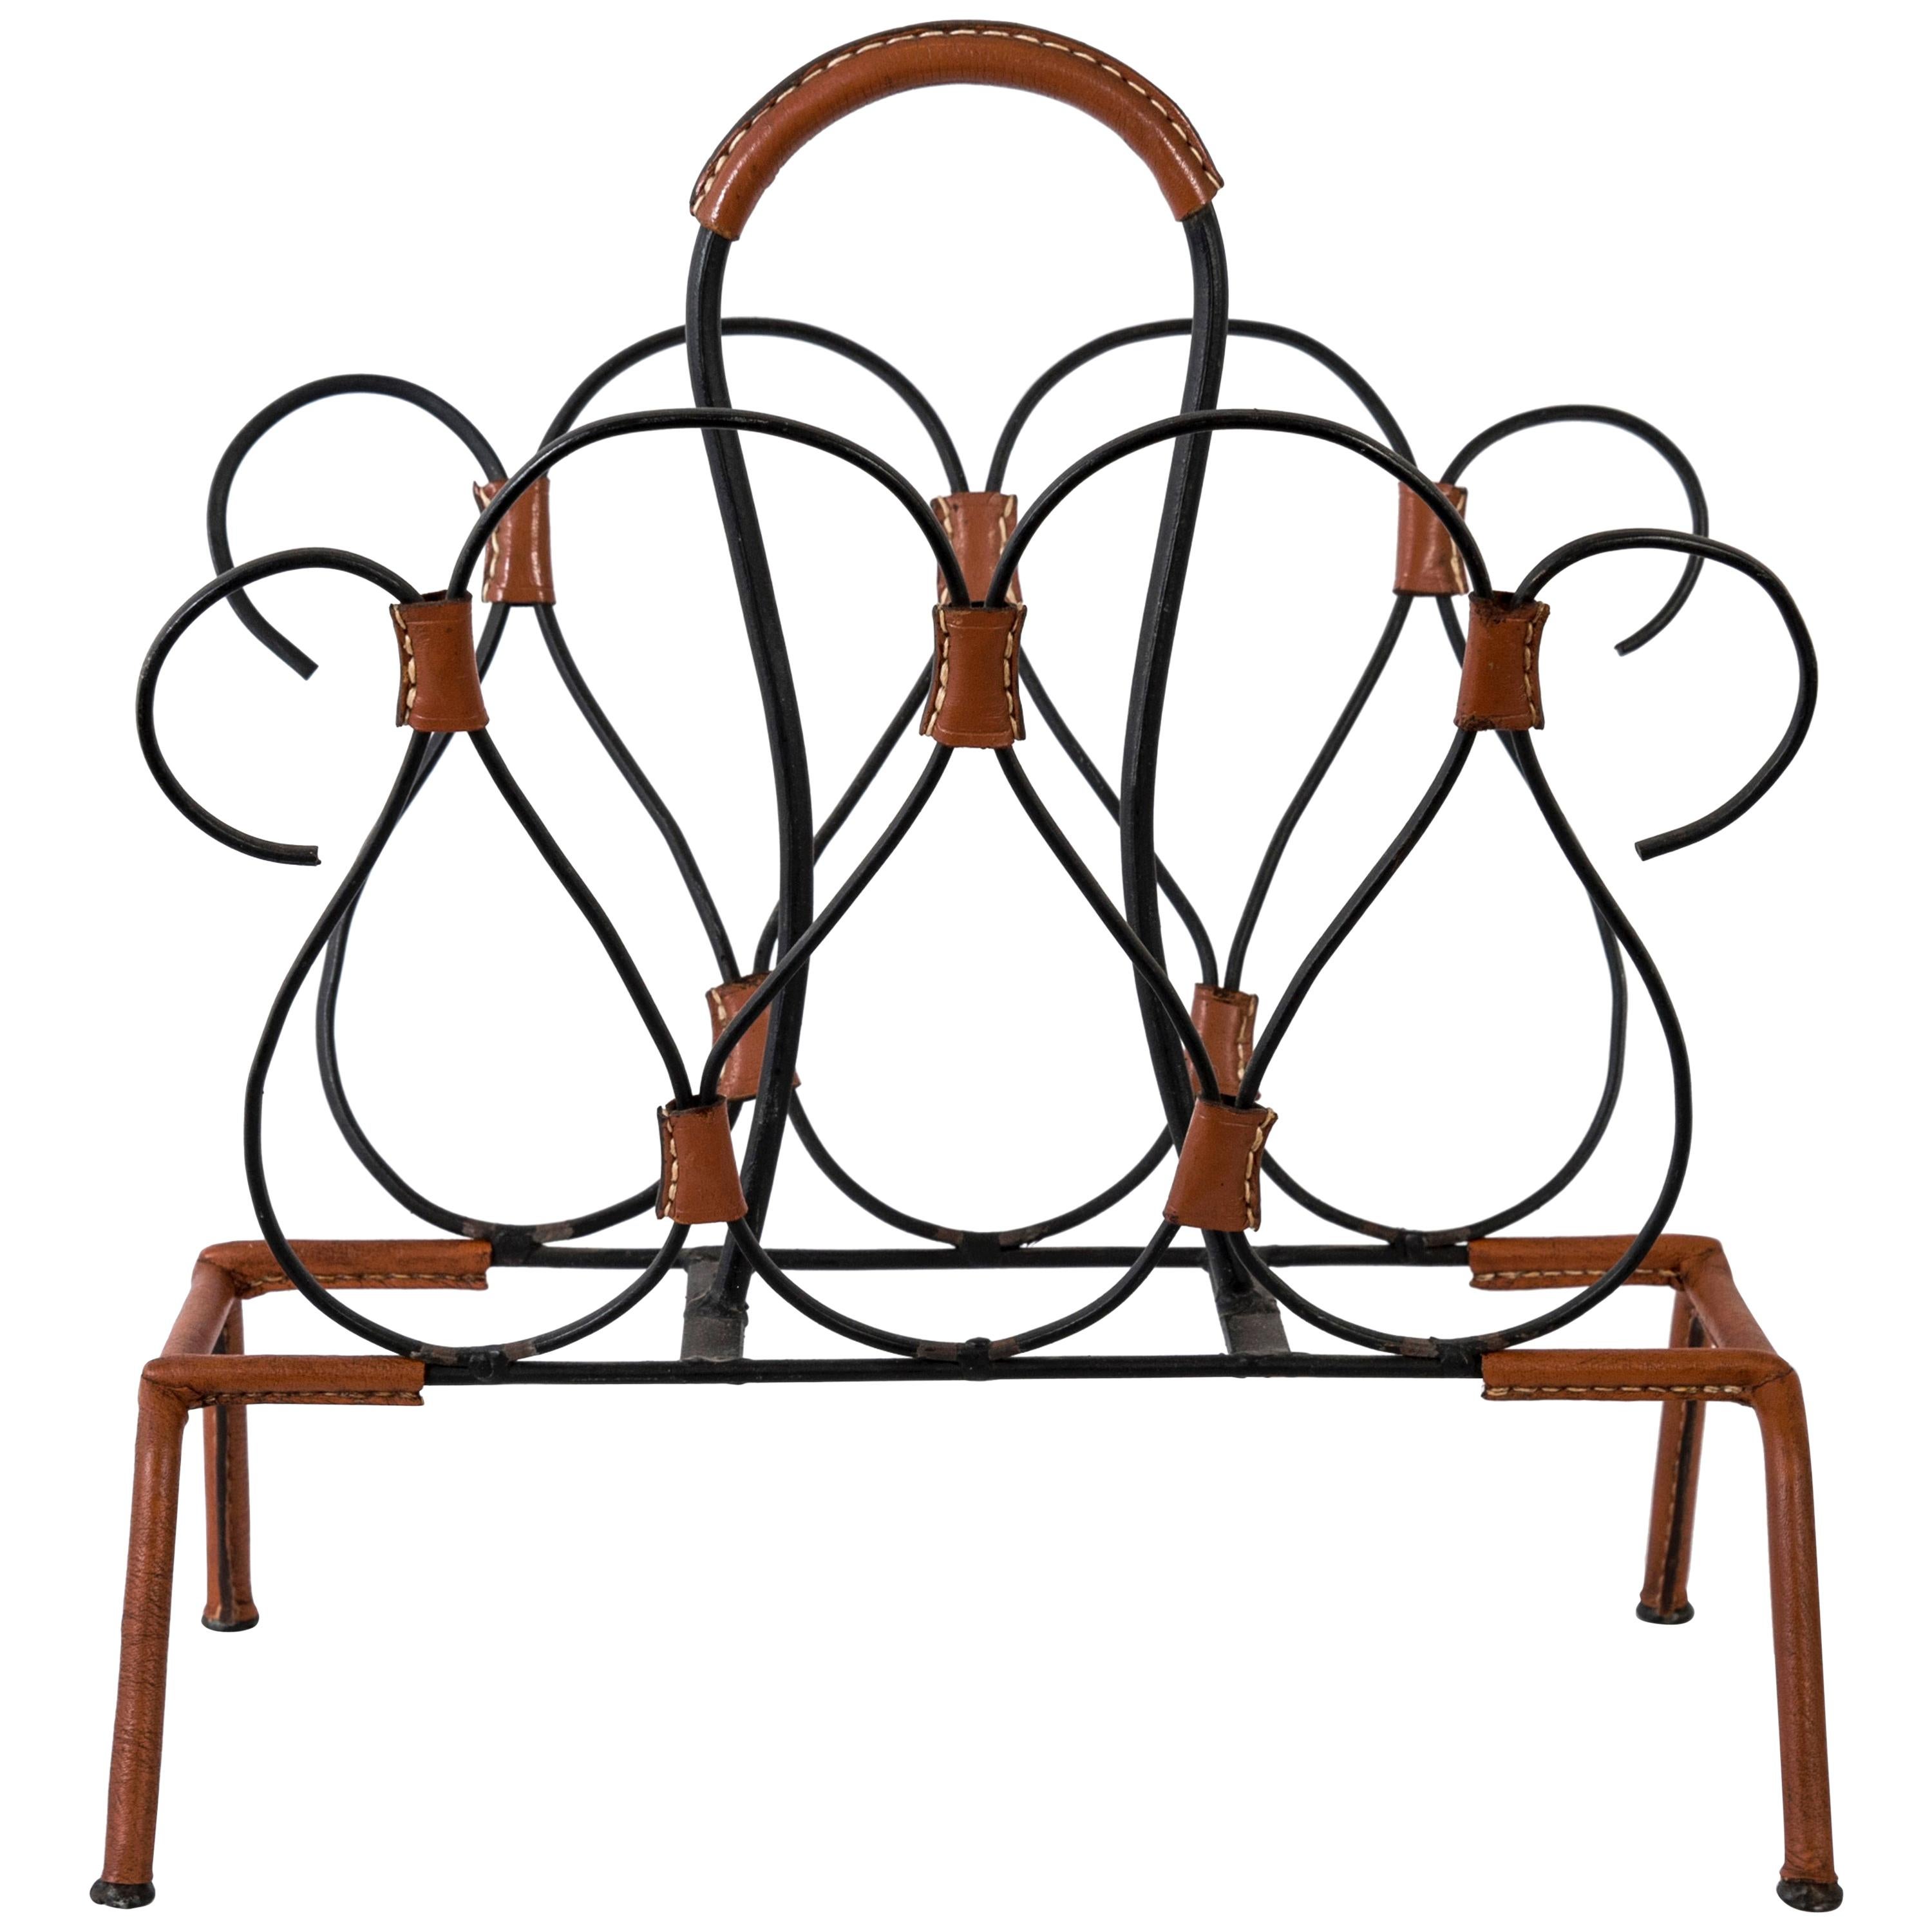 Stitched Leather Magazine Rack by Jacques Adnet